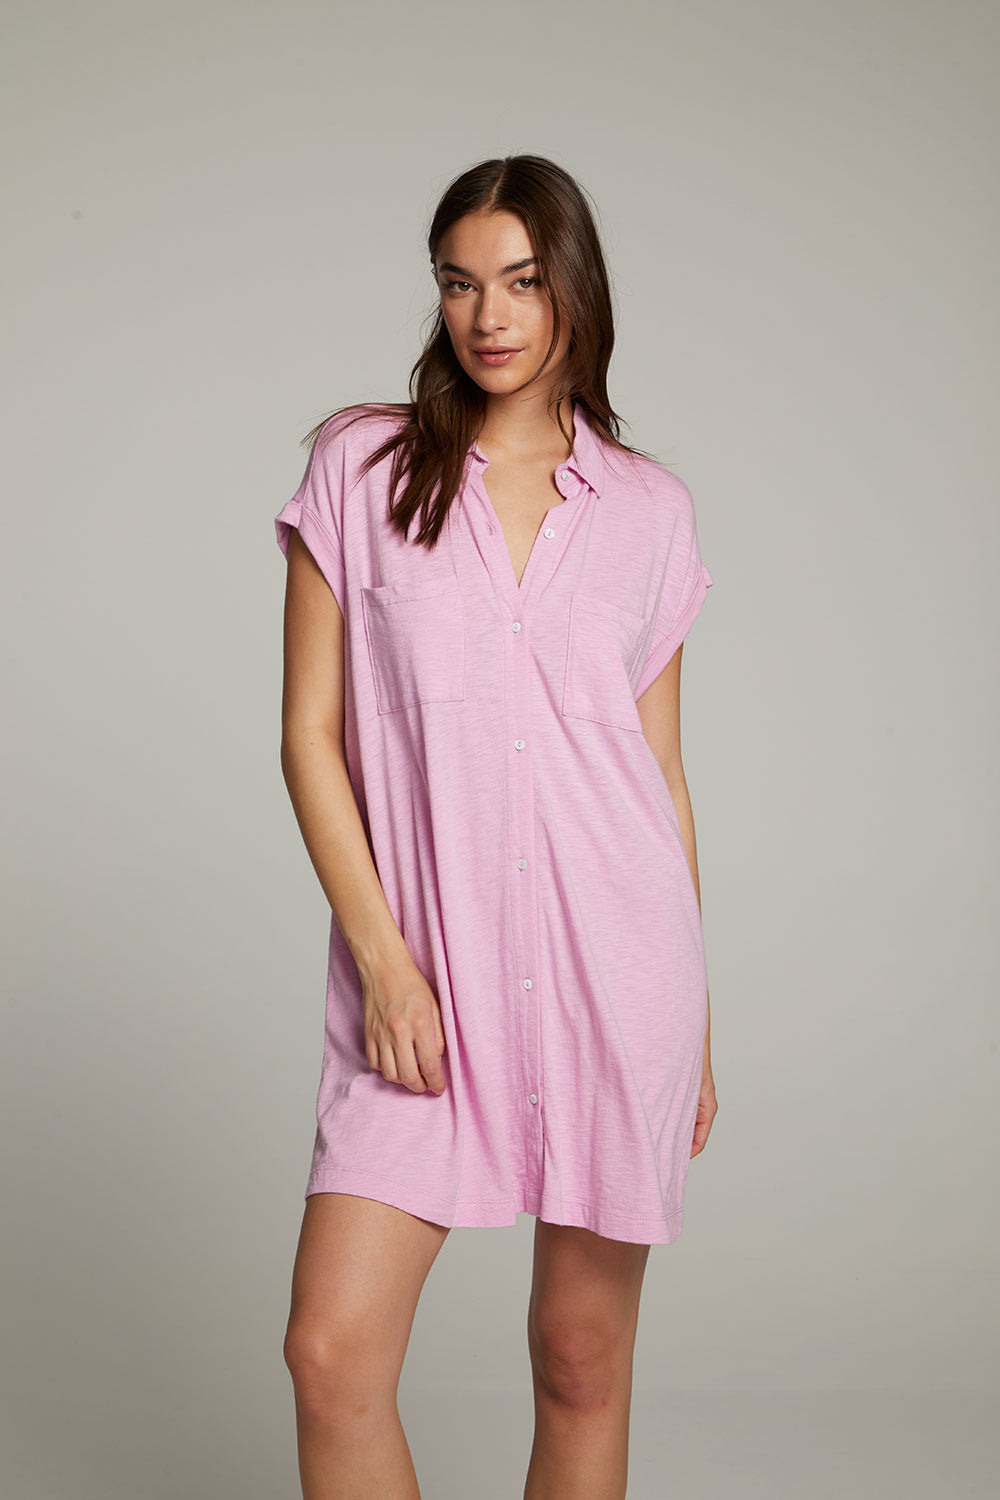 Downtown Pastel Lavender Mini Dress WOMENS chaserbrand